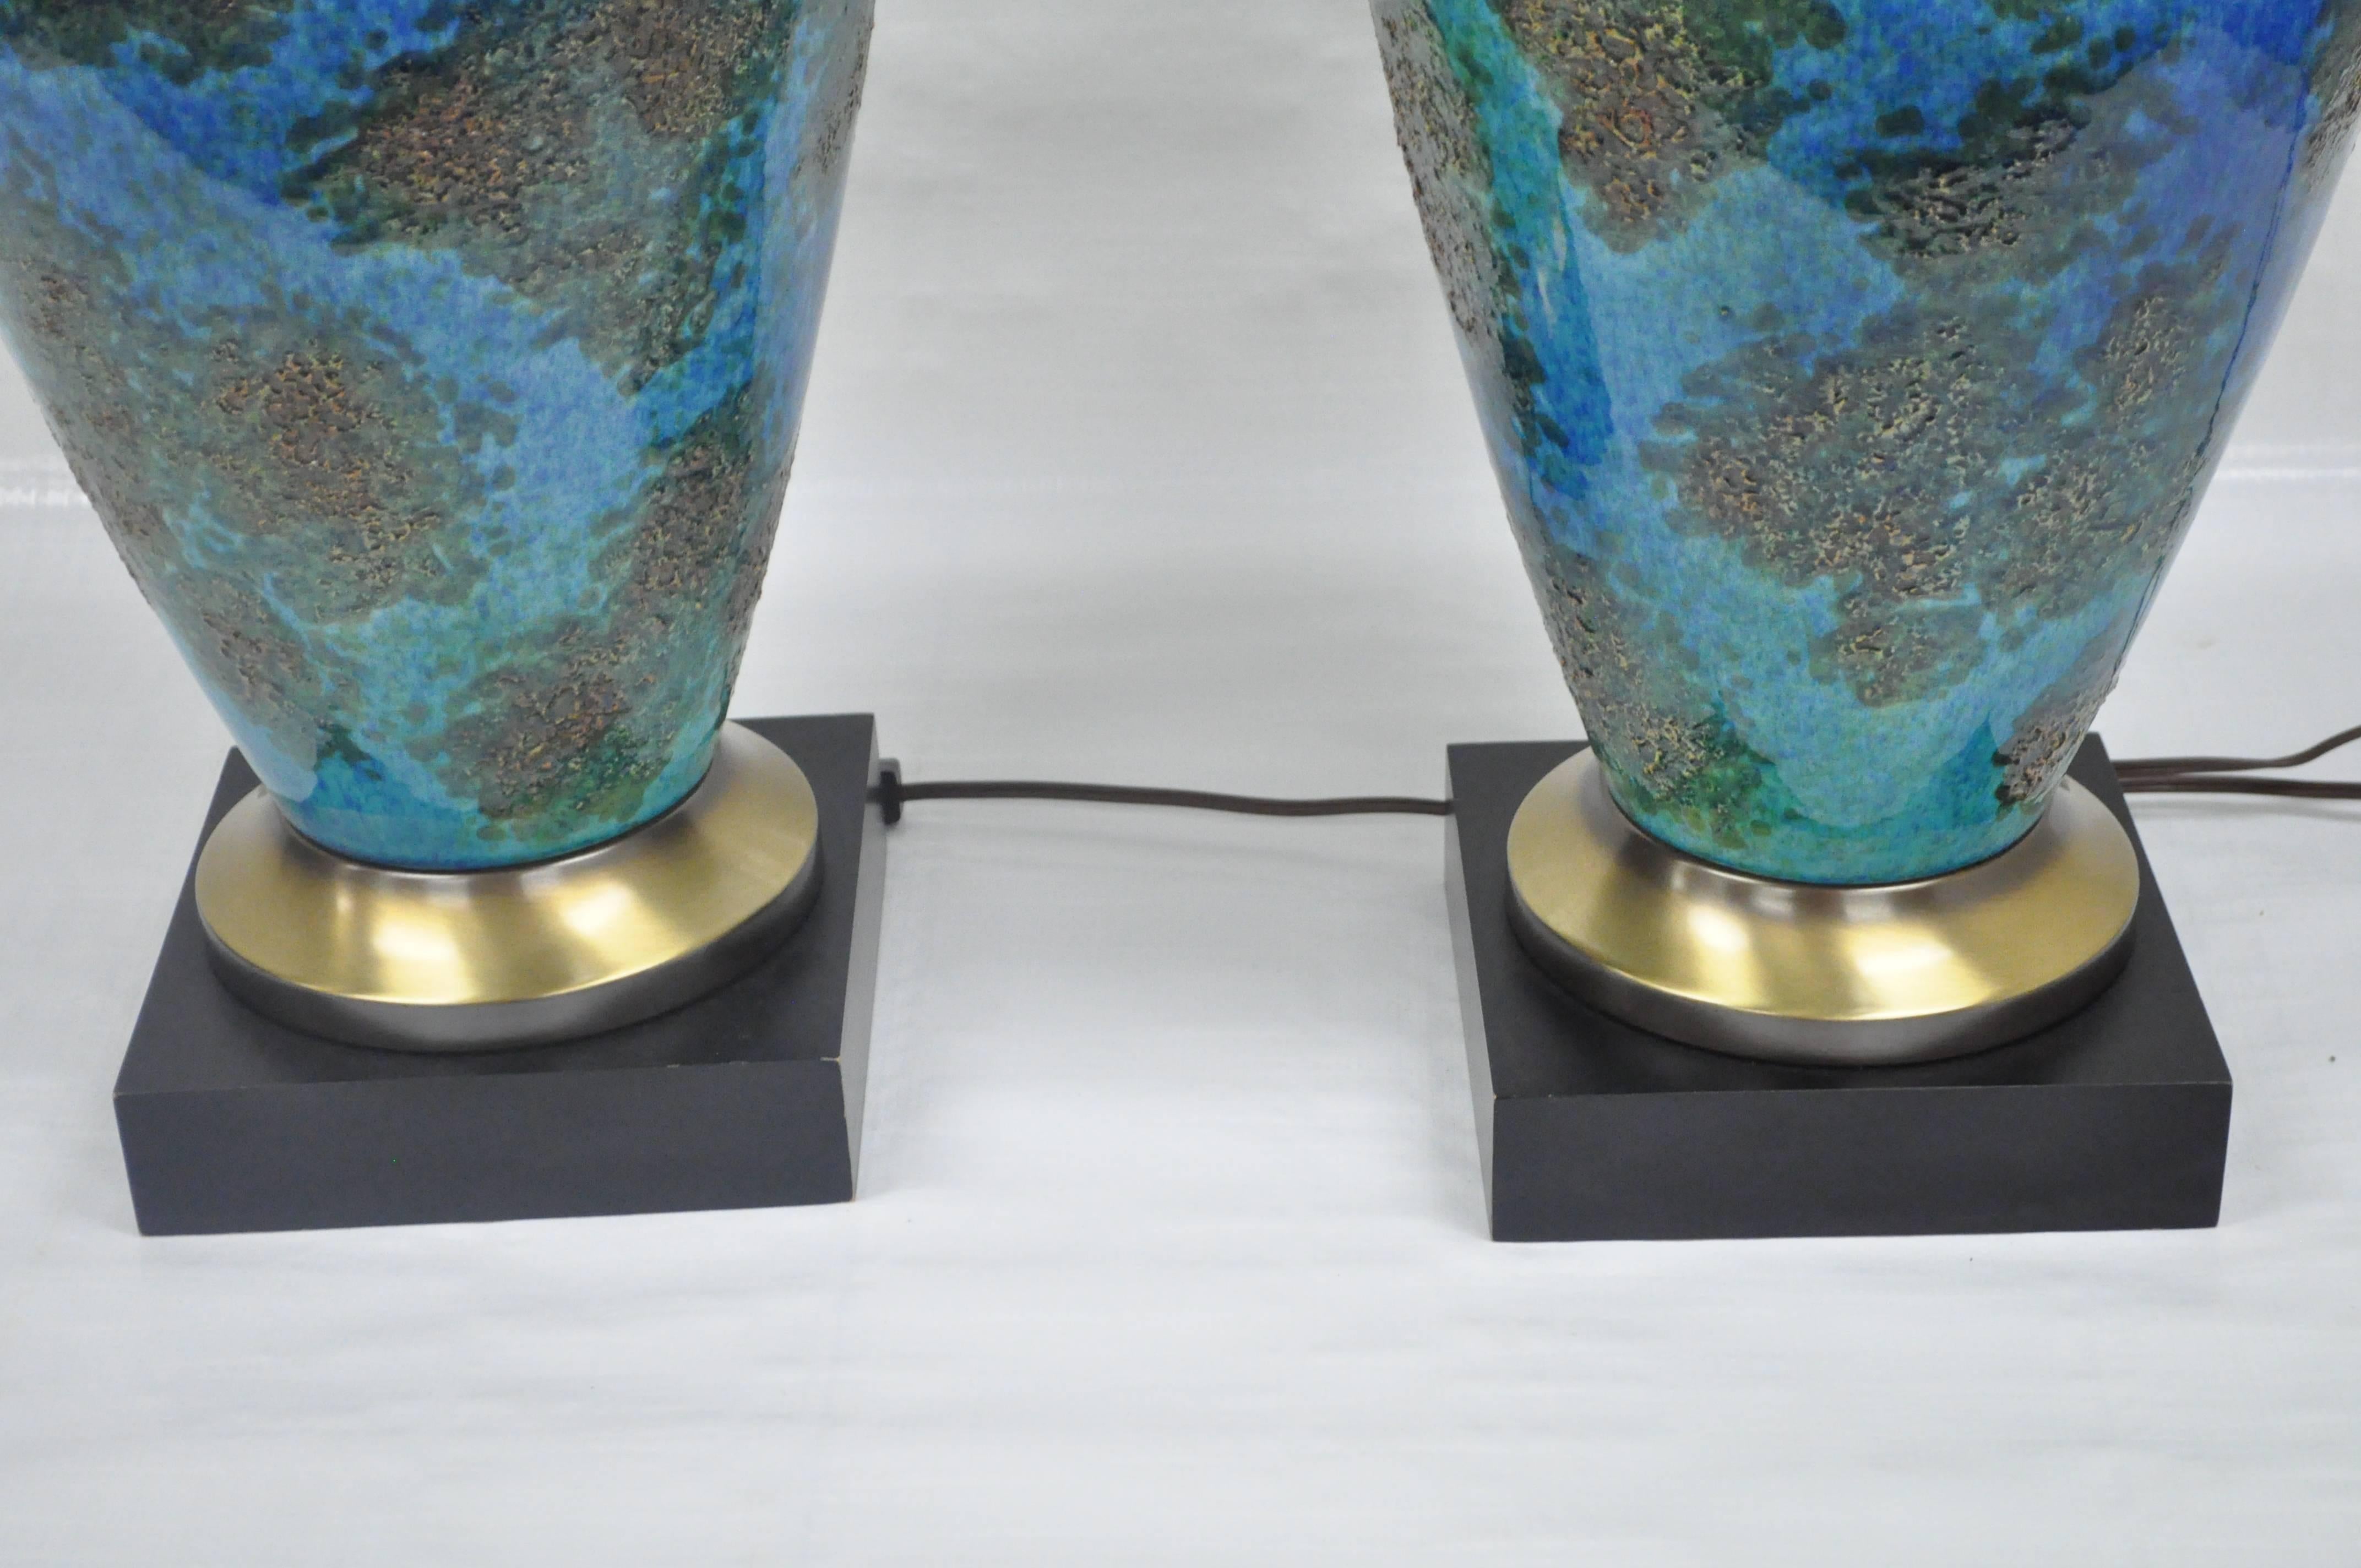 Pair of Mid Century Italian Modern Blue Glazed Ceramic Pottery Table Lamps In Excellent Condition For Sale In Philadelphia, PA